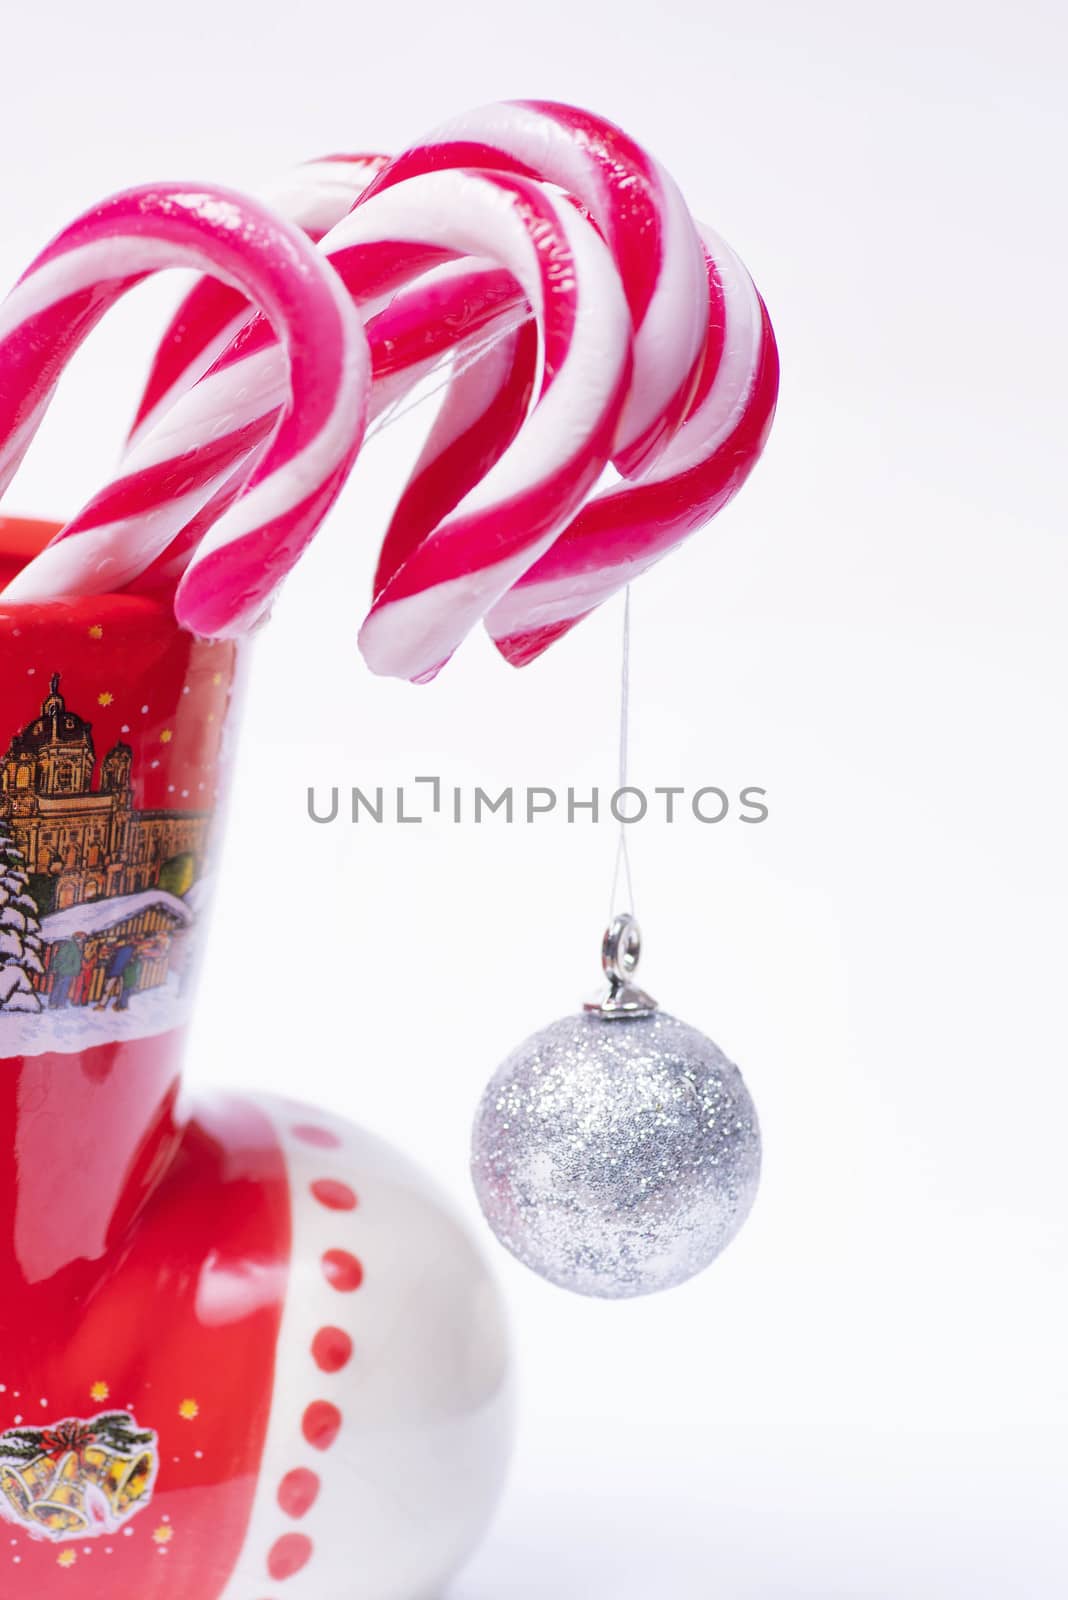 Traditional Christmas candies, lollipop, sticks minimalistic design.New Year candy canes in a red cup on a white background. New Year concept. Sweet candy canes.